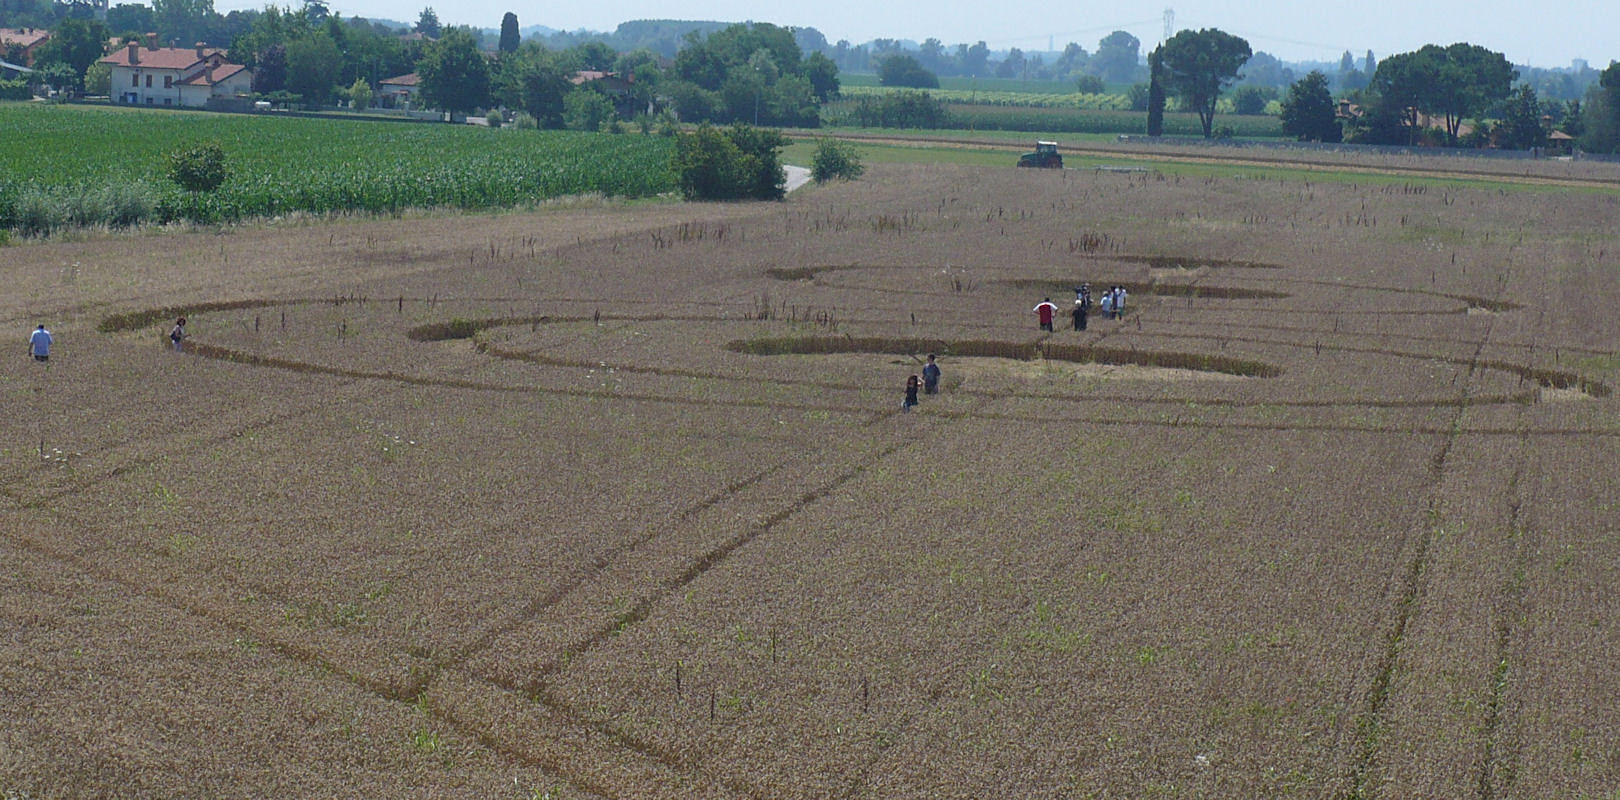 Crop circles in Friuli: 350 KB; click on the image to enlarge